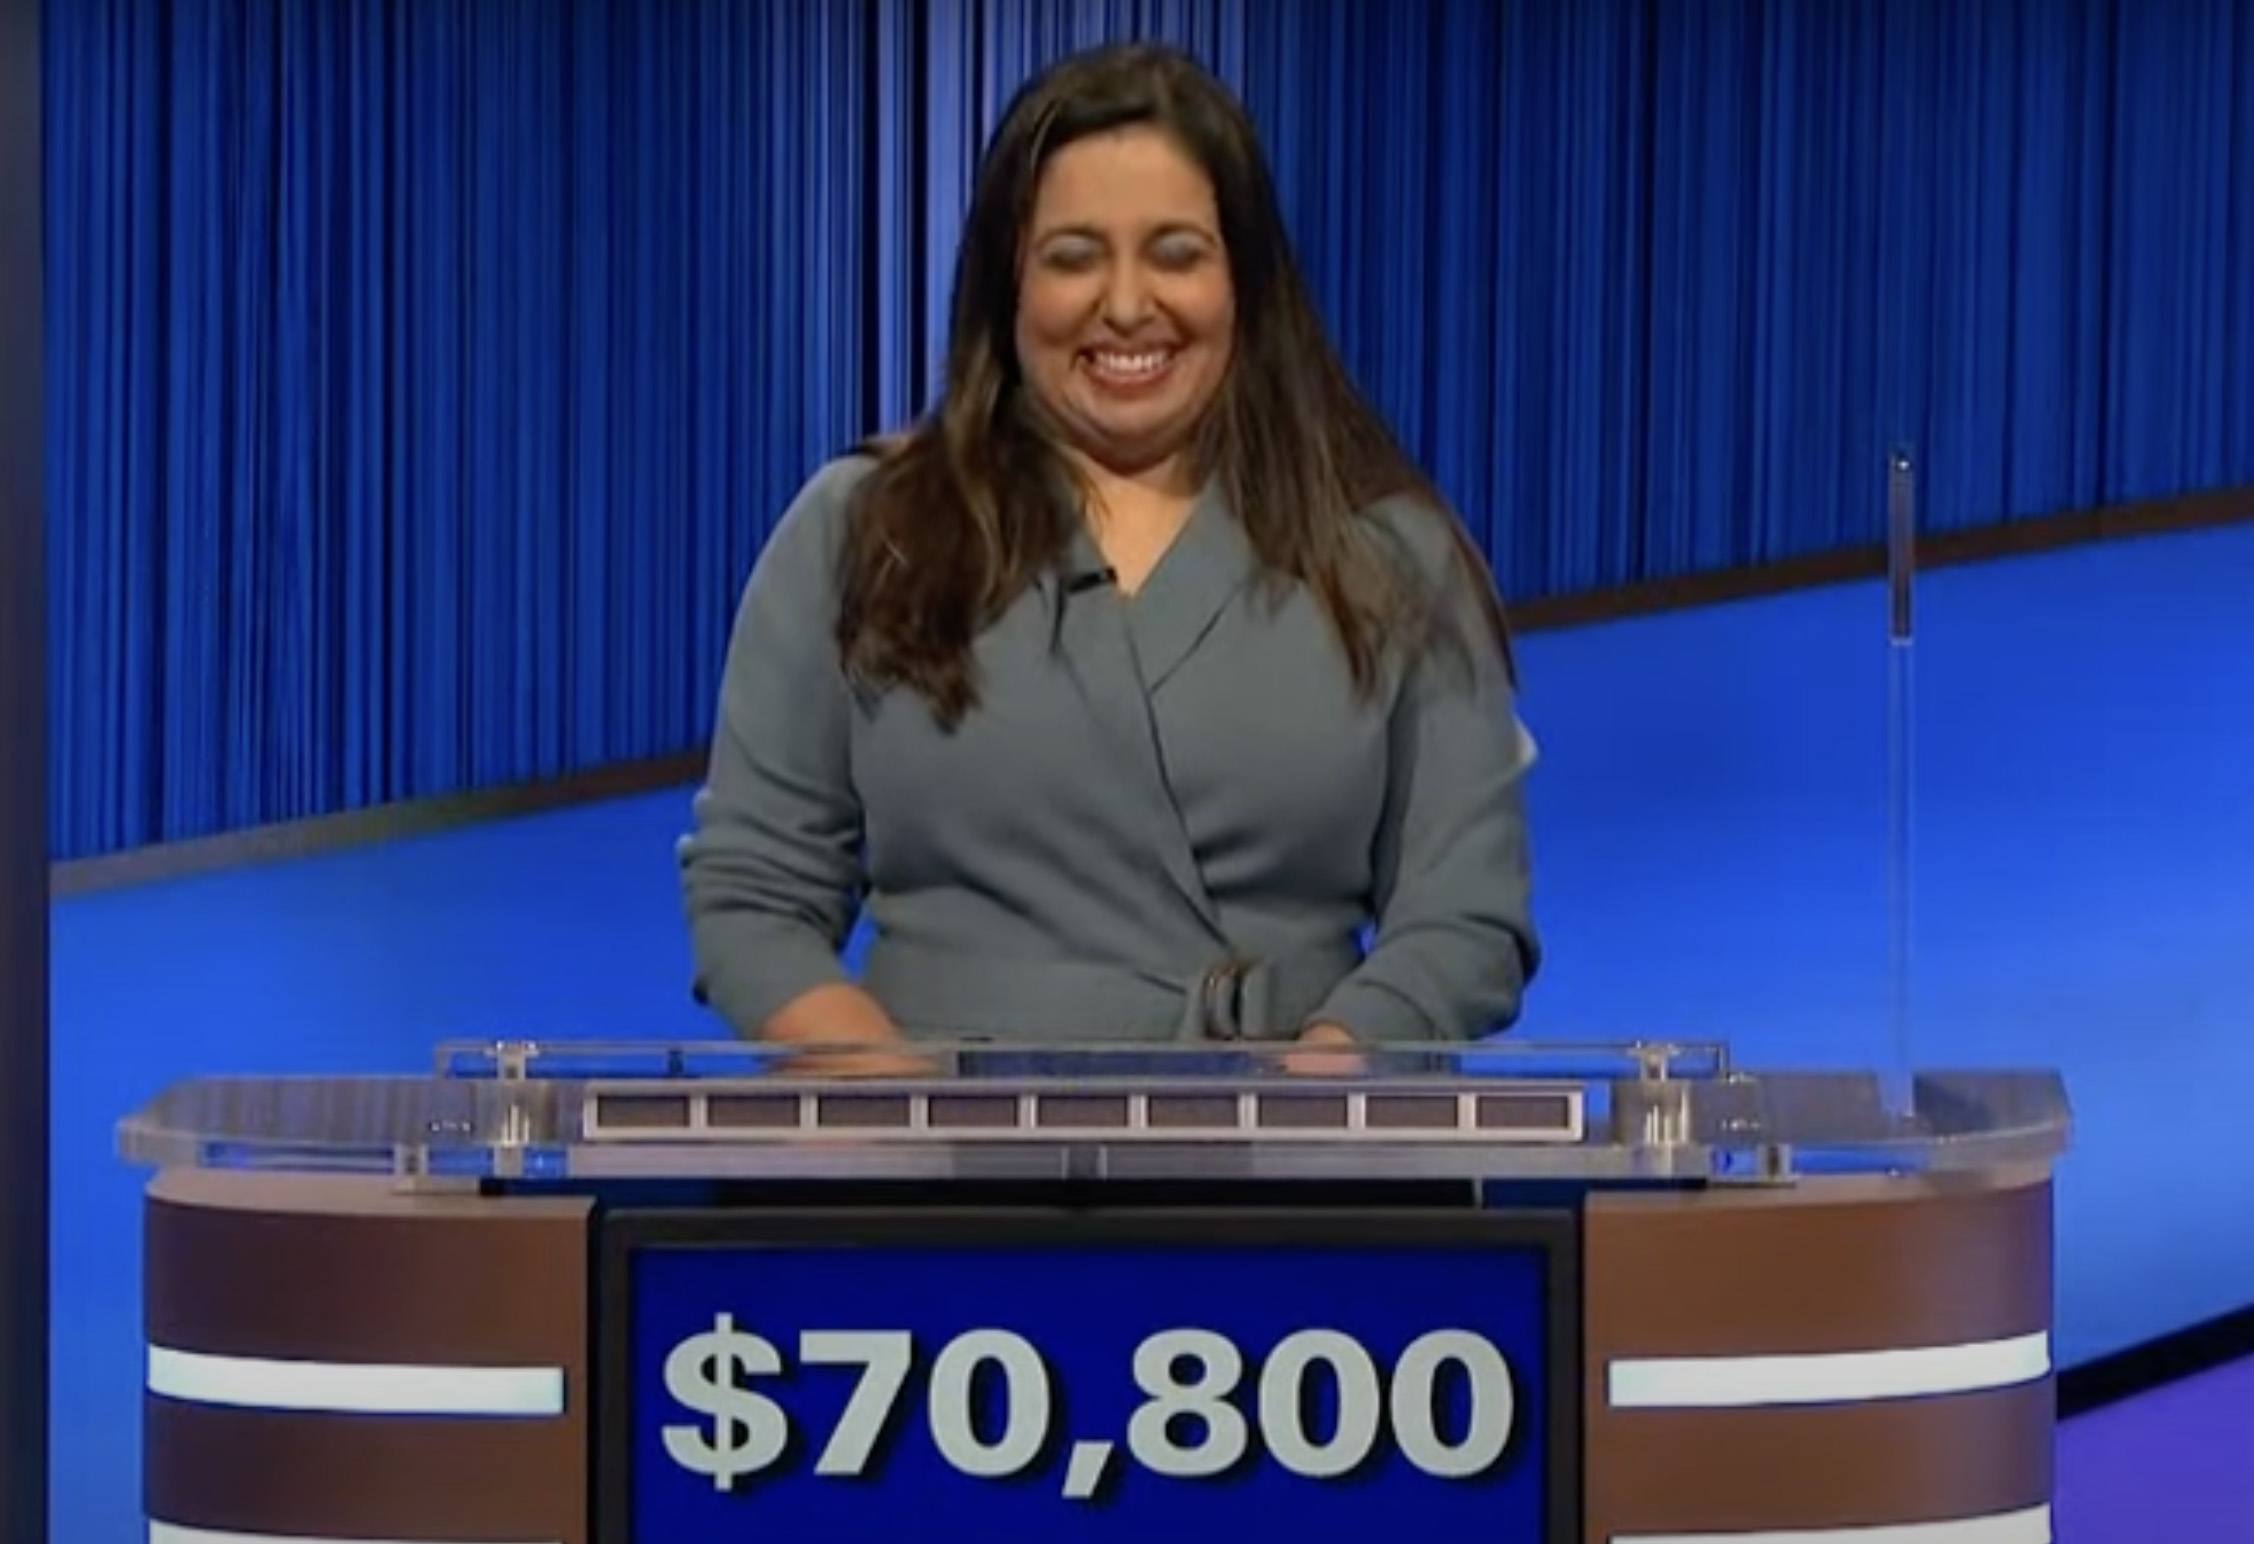 Jeopardy! devotees are also bothered because the deciding matches air airing on major holidays